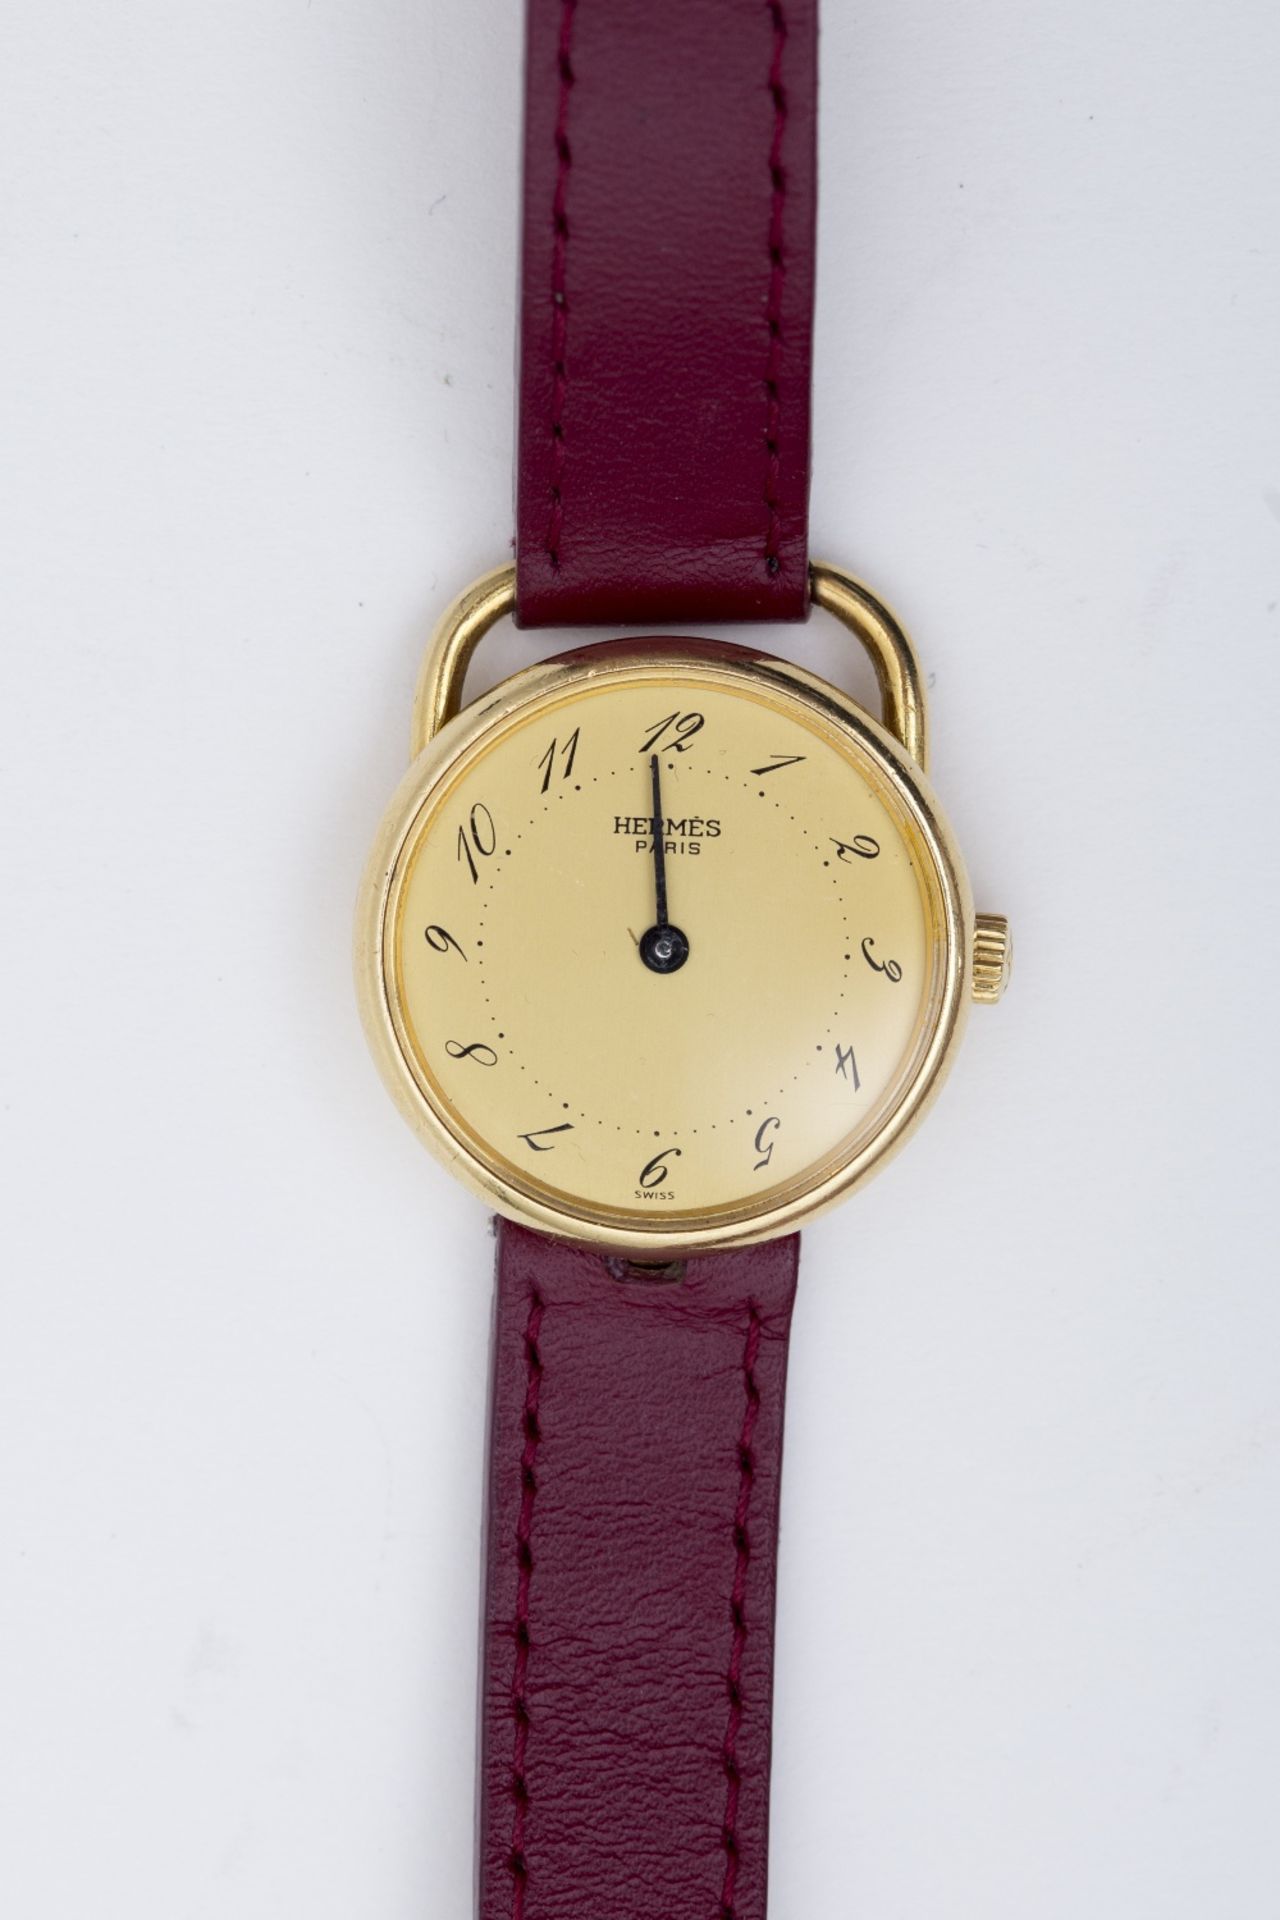 Hermès Lady's Arceau watch: 18 kt yellow gold, round dial, golden face, Arabic numerals, with double